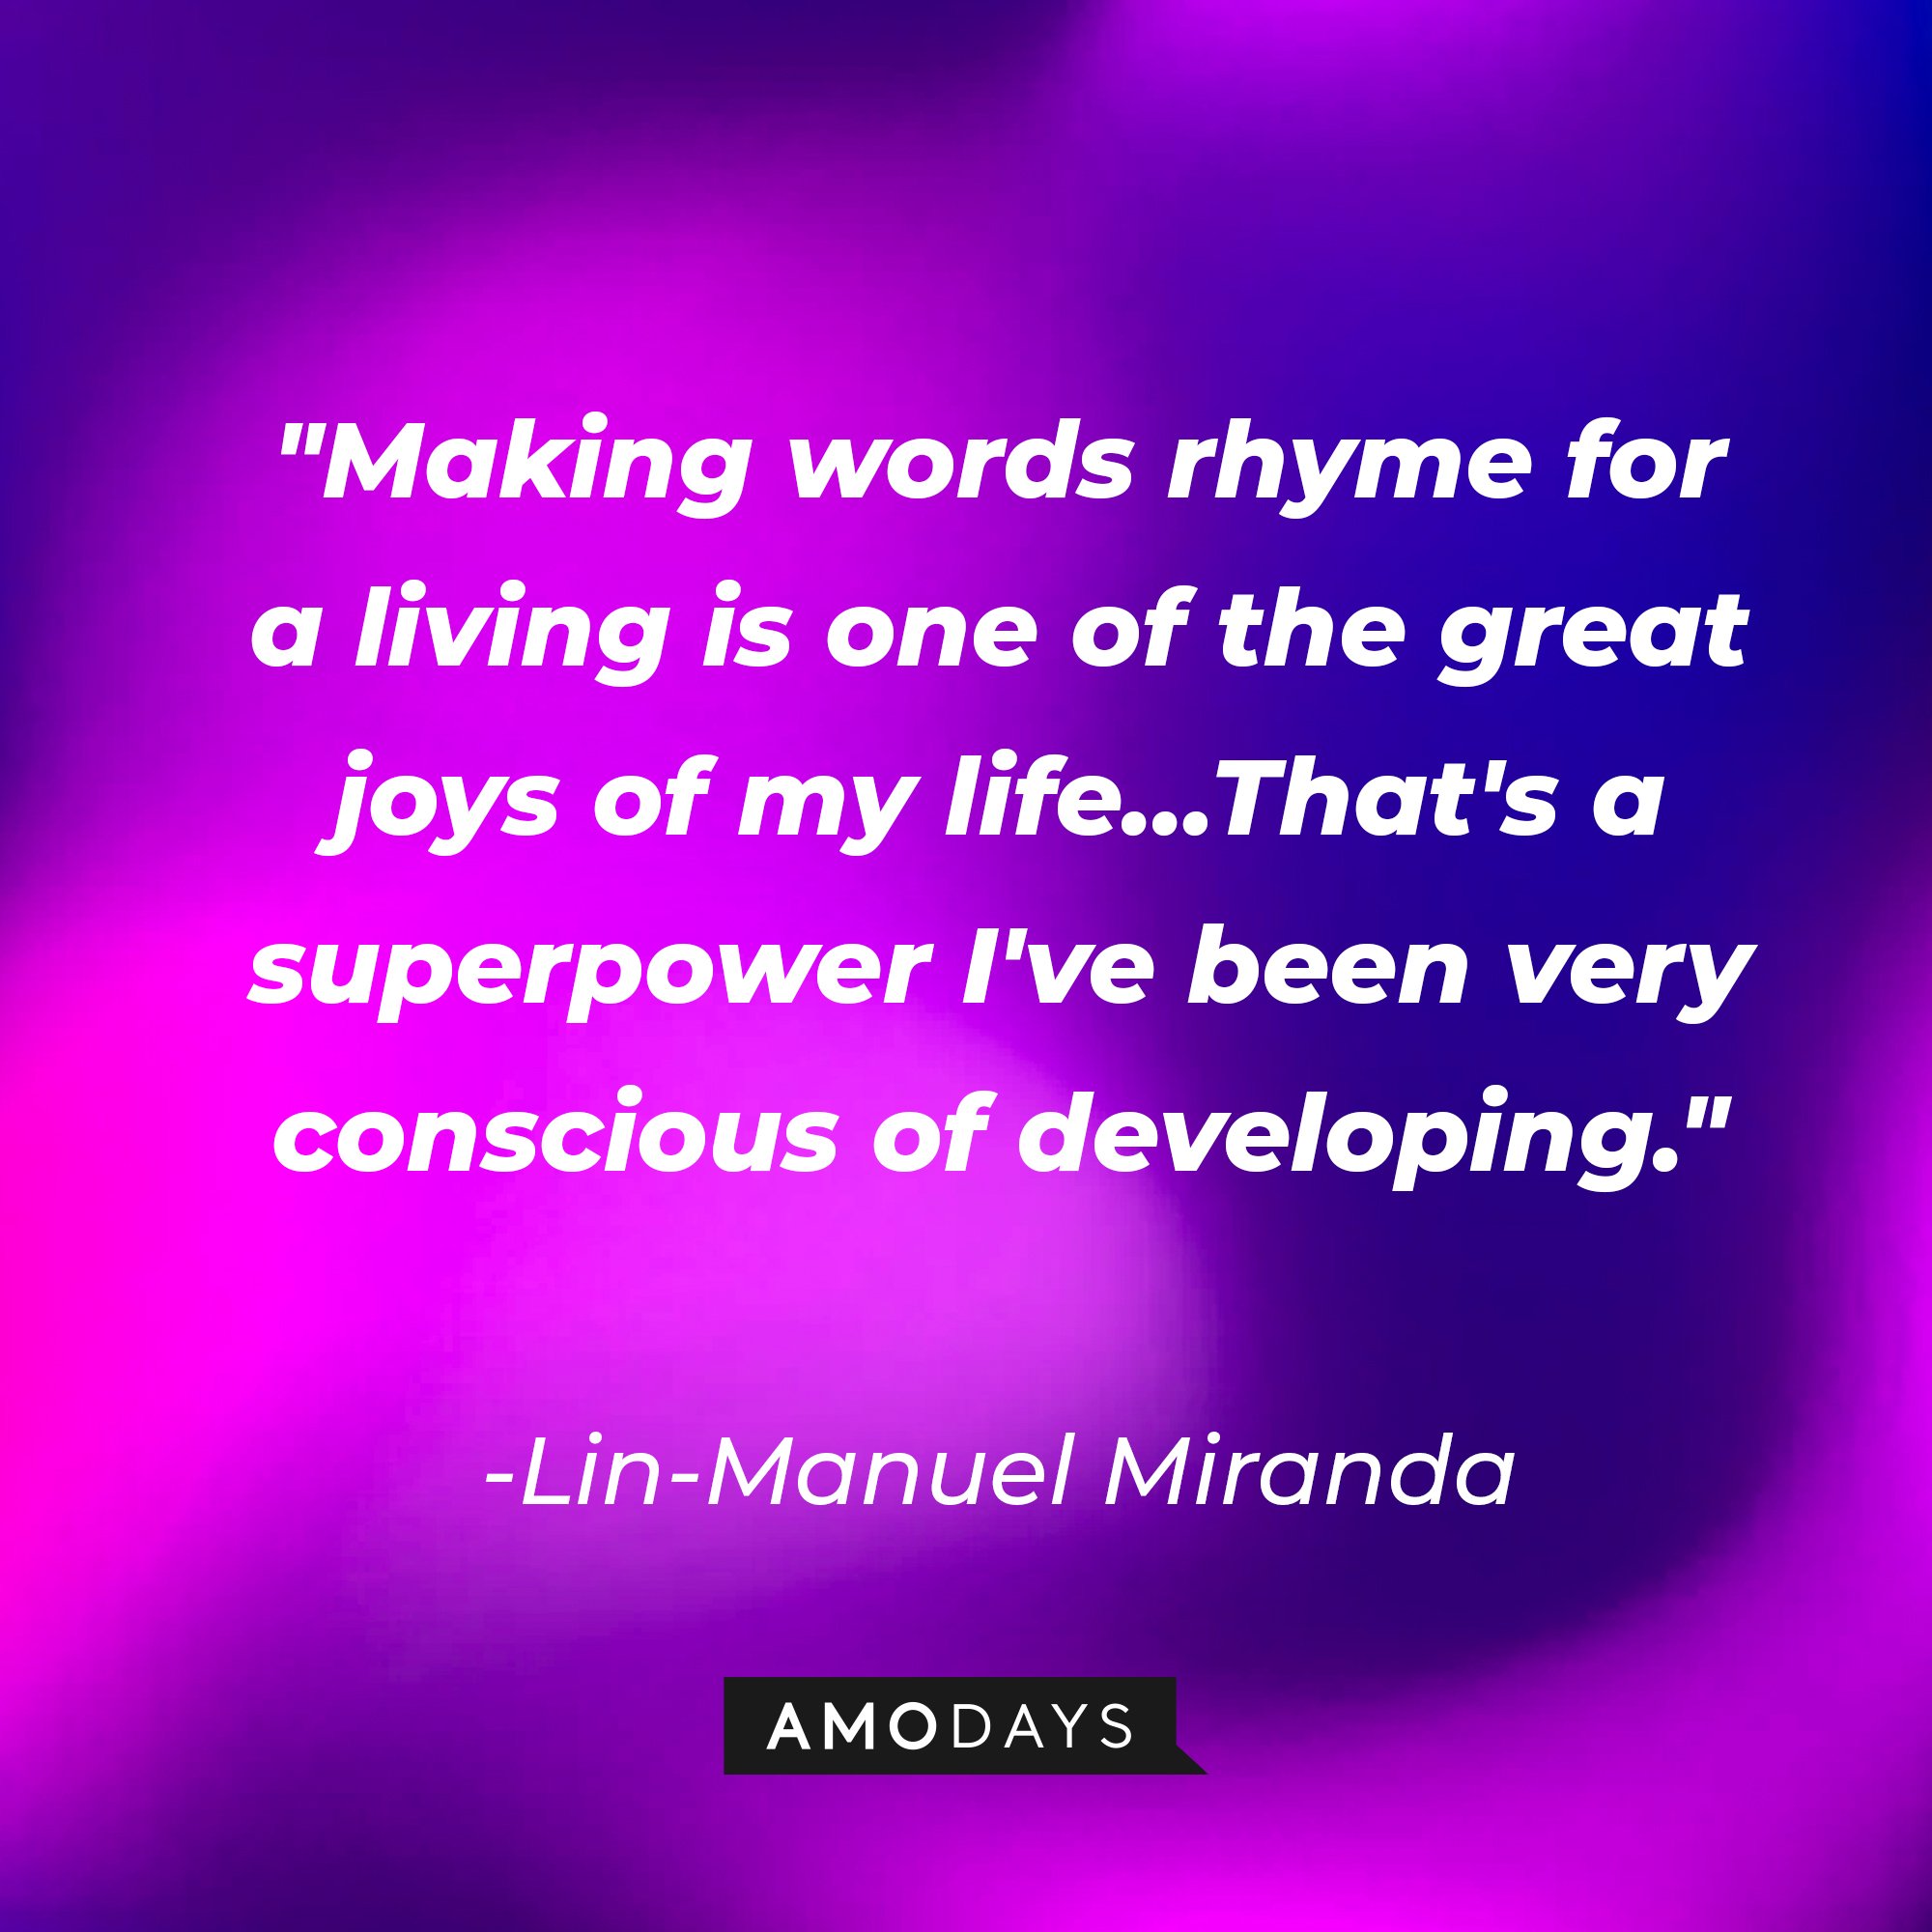 Lin-Manuel Miranda's quote: "Making words rhyme for a living is one of the great joys of my life… That's a superpower I've been very conscious of developing." | Image: AmoDays